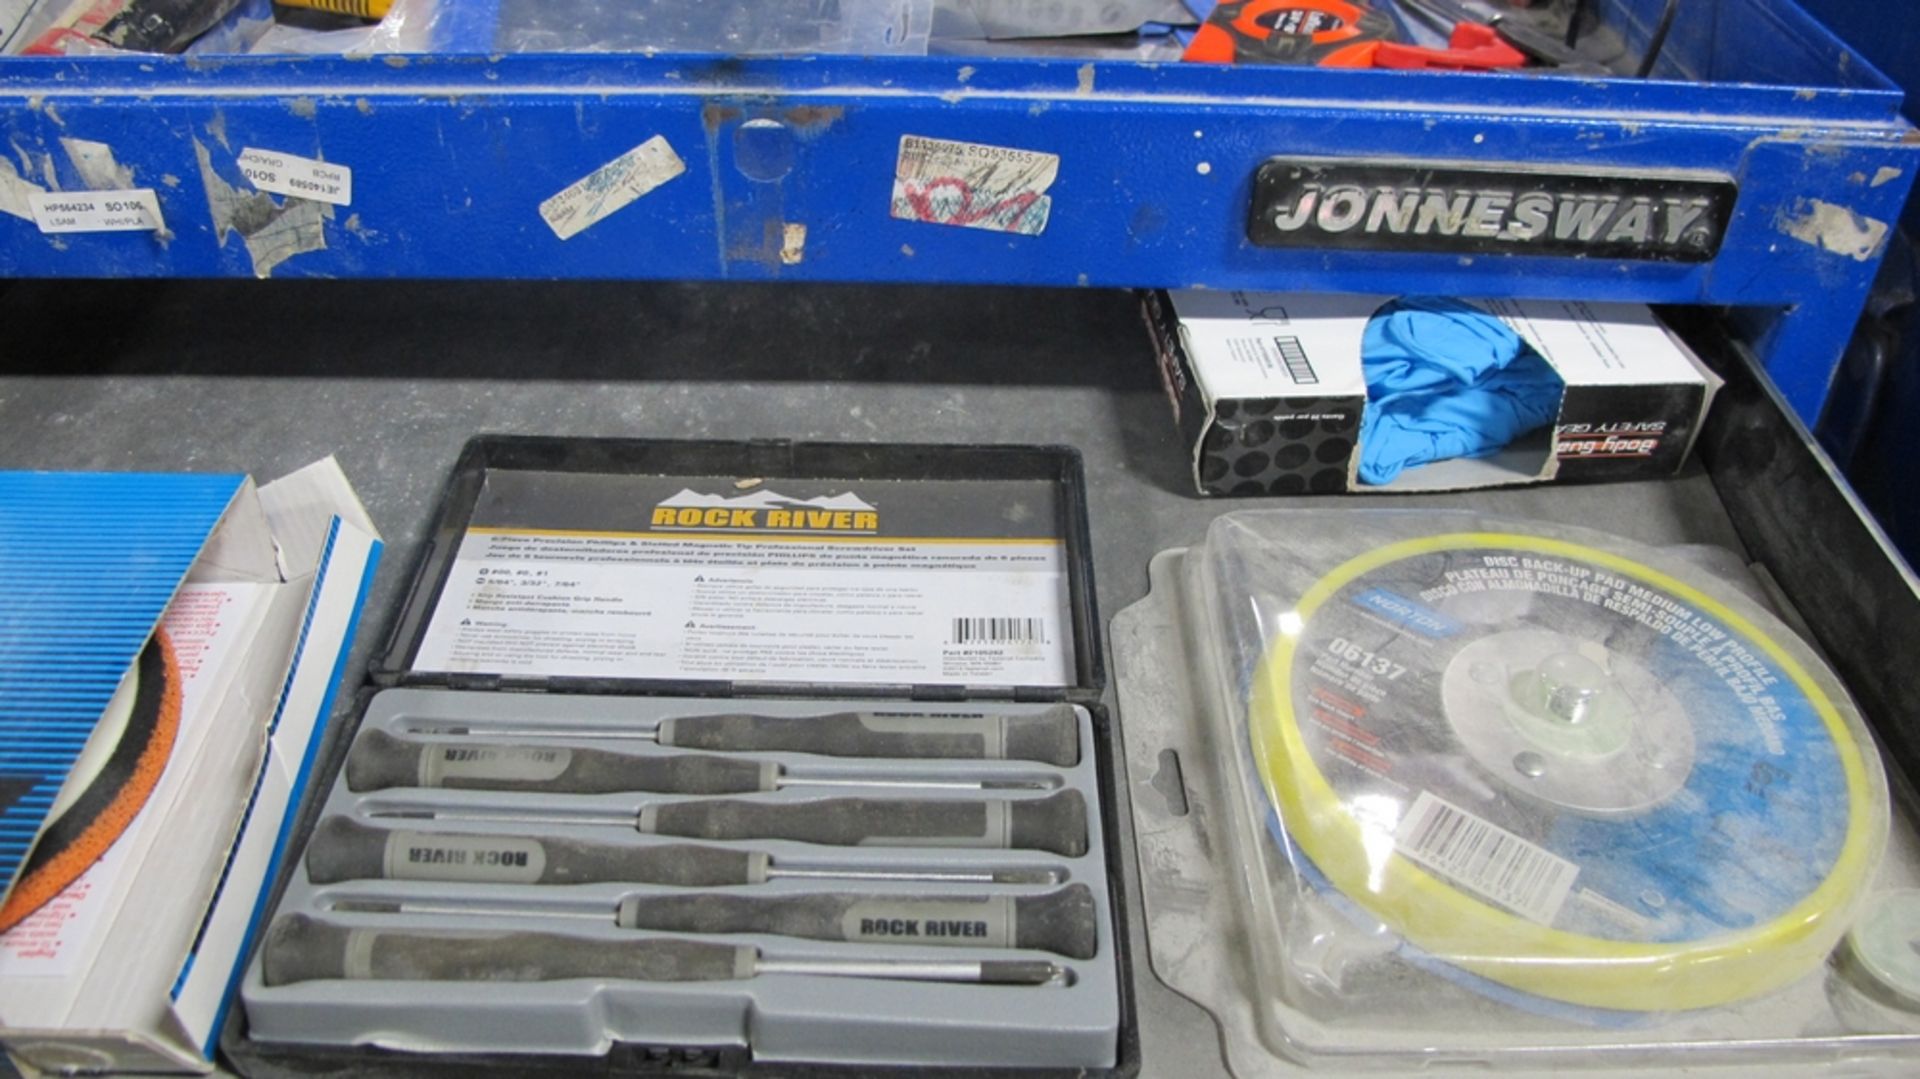 LOT OF 2 JONESWAY TOOL BOXES, 13 DRAWERS W/TOOLS (100 SHIRLEY AVE KITCHENER) - Image 3 of 13